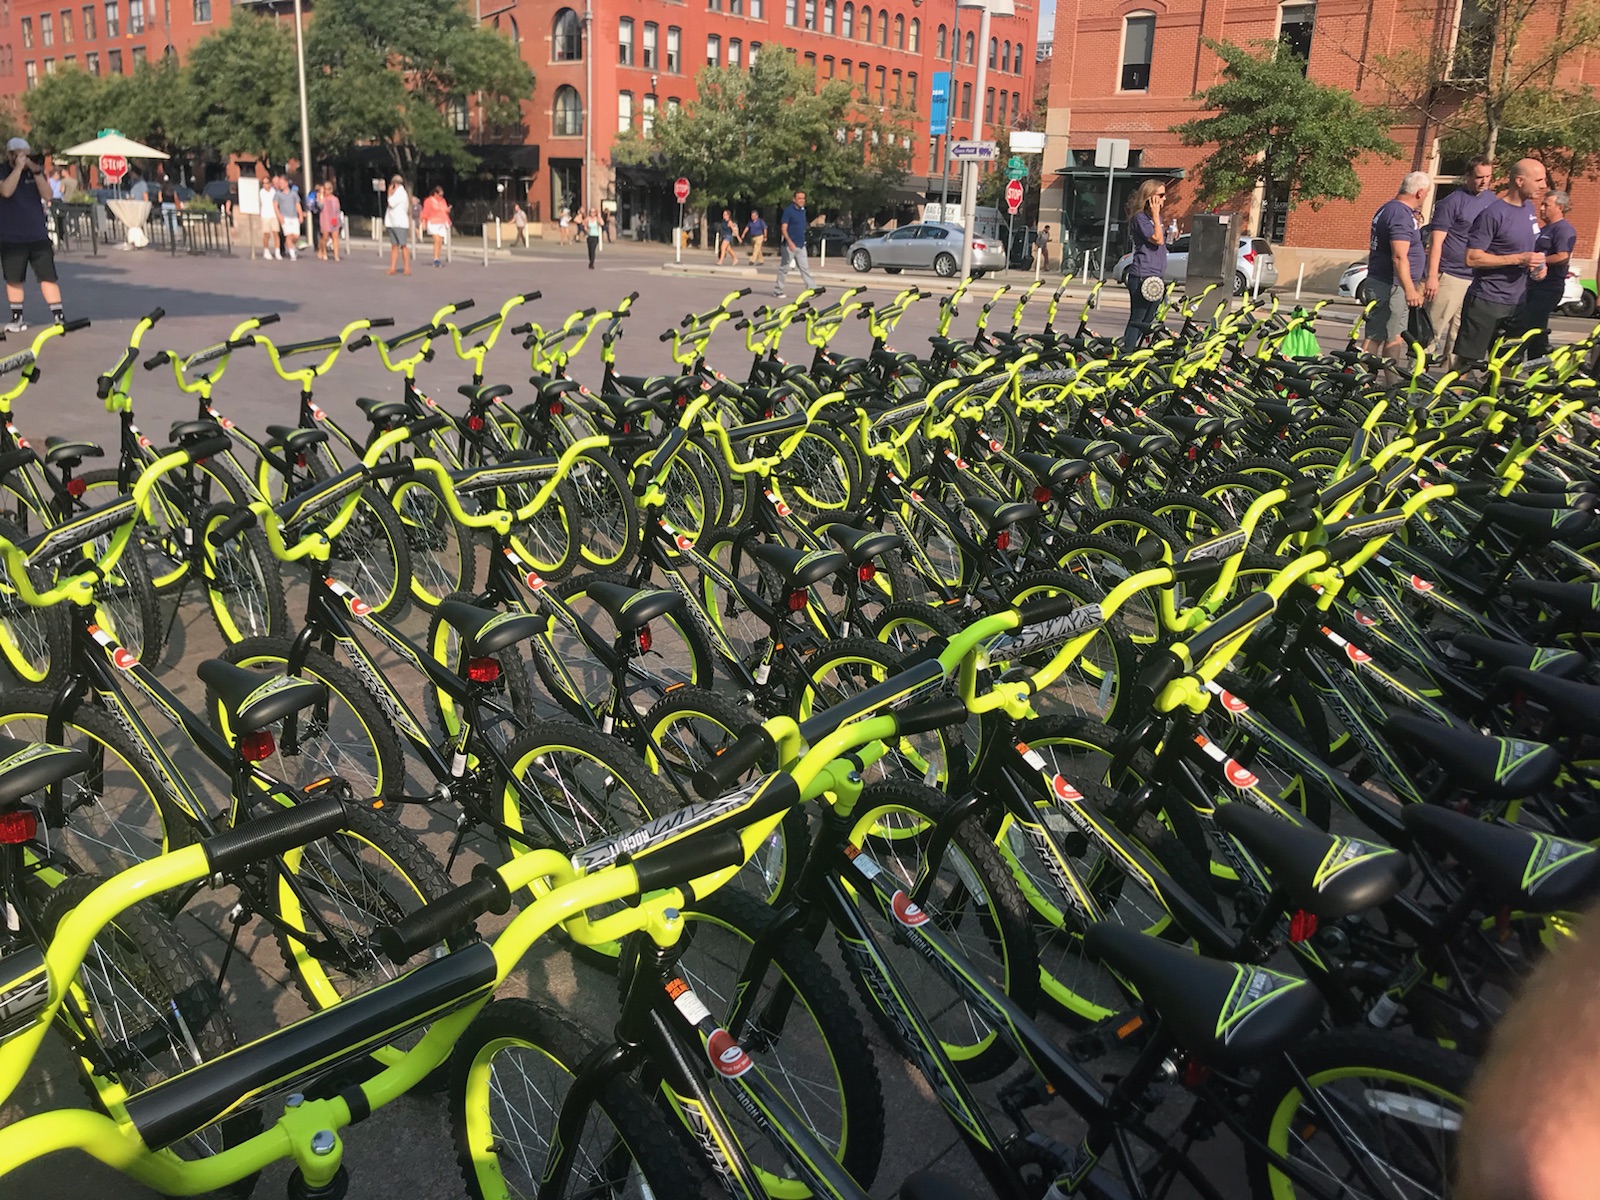 200 bikes at Wish for Wheels in Denver CO